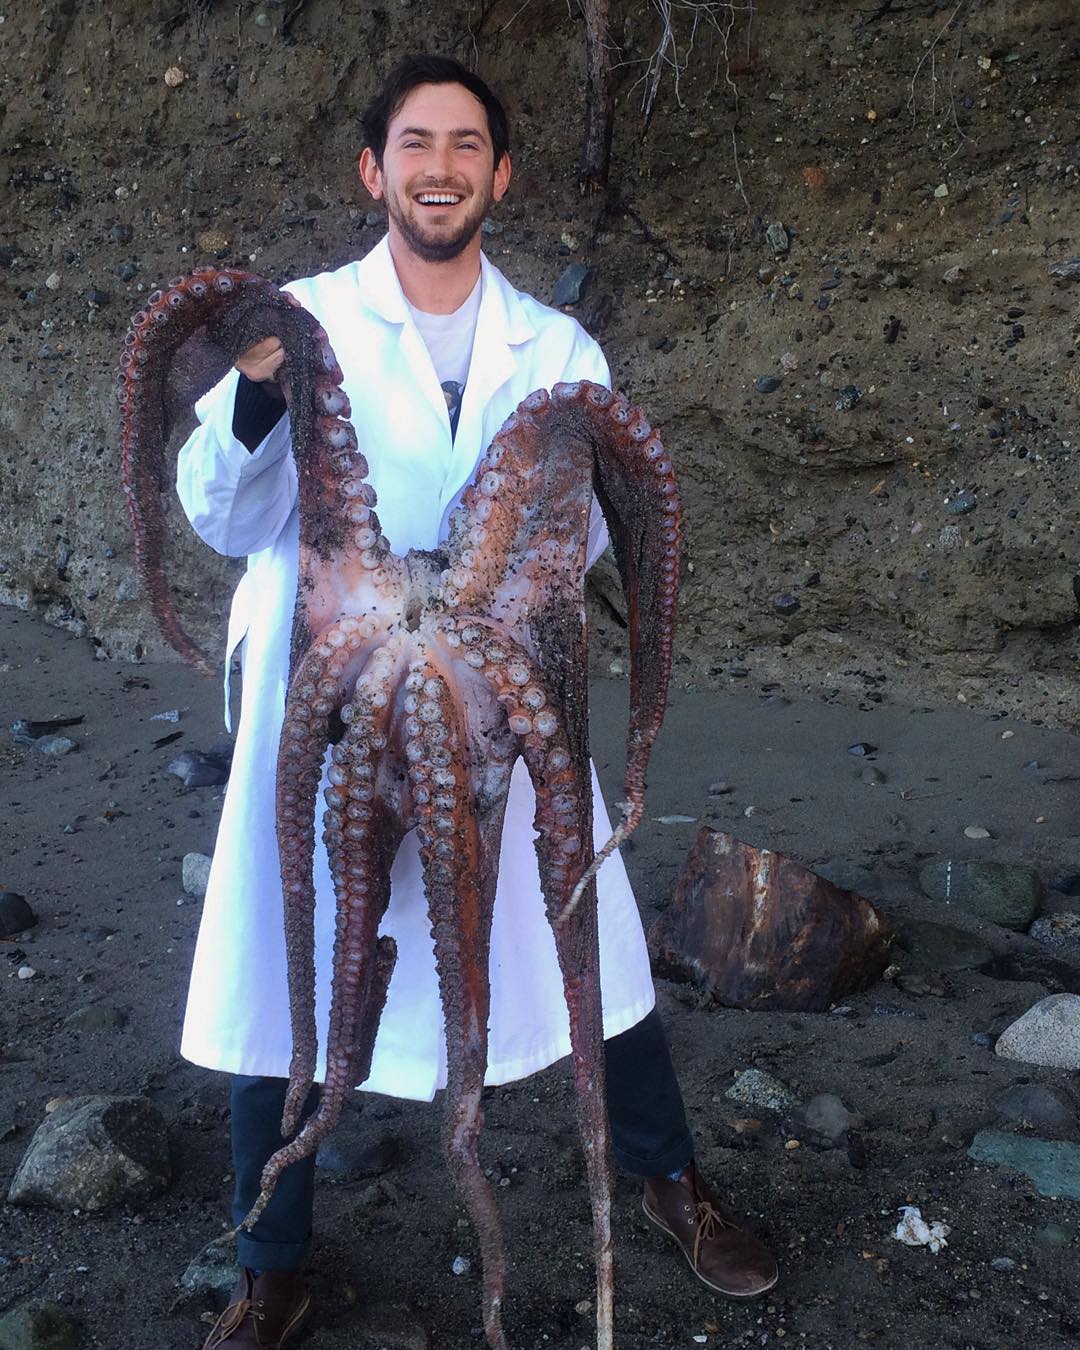 Jake Lawlor smiling, standing on a rocky beach, wearing a white lab coat, and holding a dead giant pacific octopus.